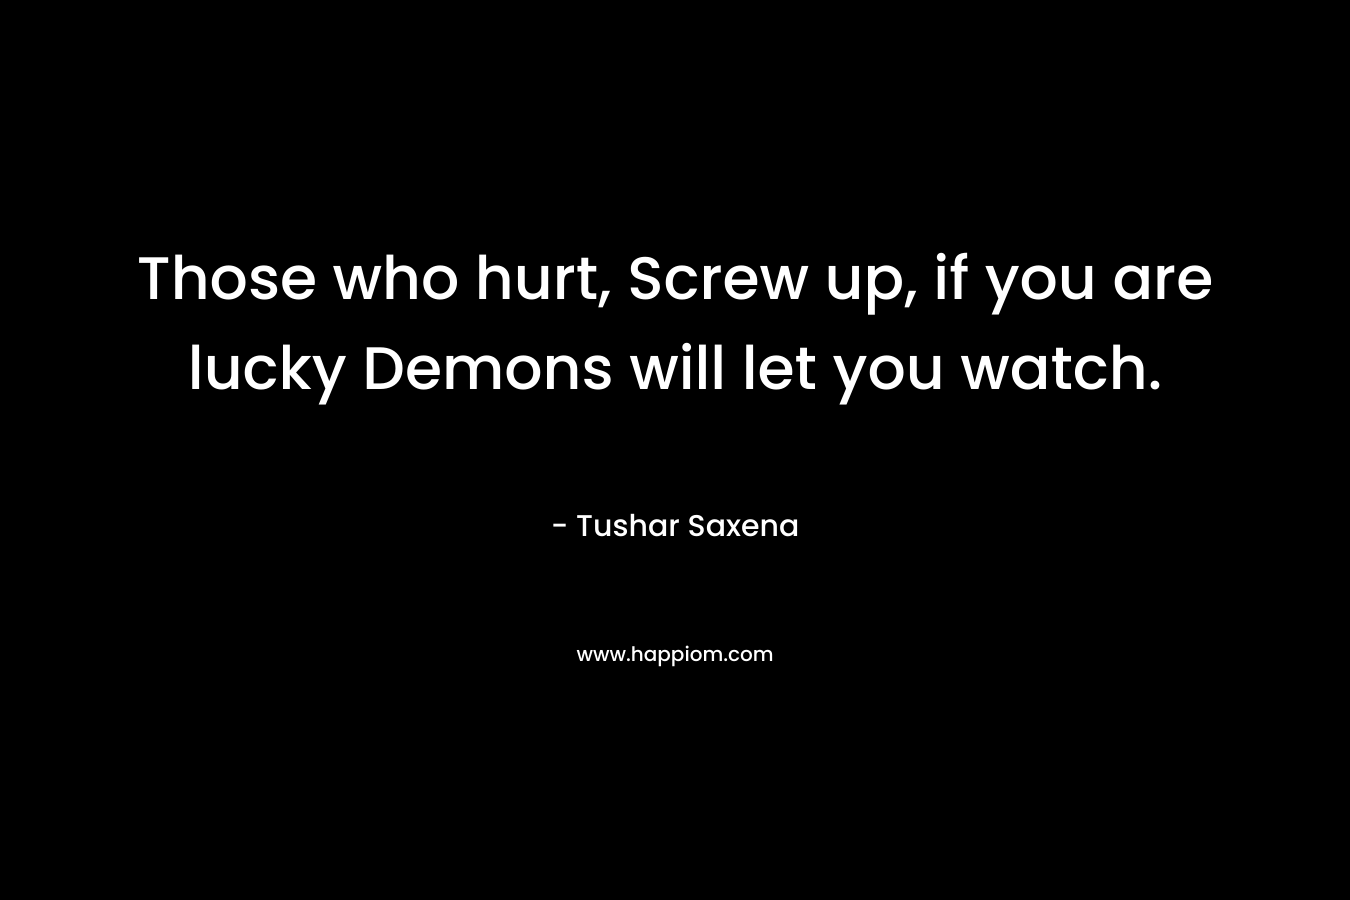 Those who hurt, Screw up, if you are lucky Demons will let you watch. – Tushar Saxena